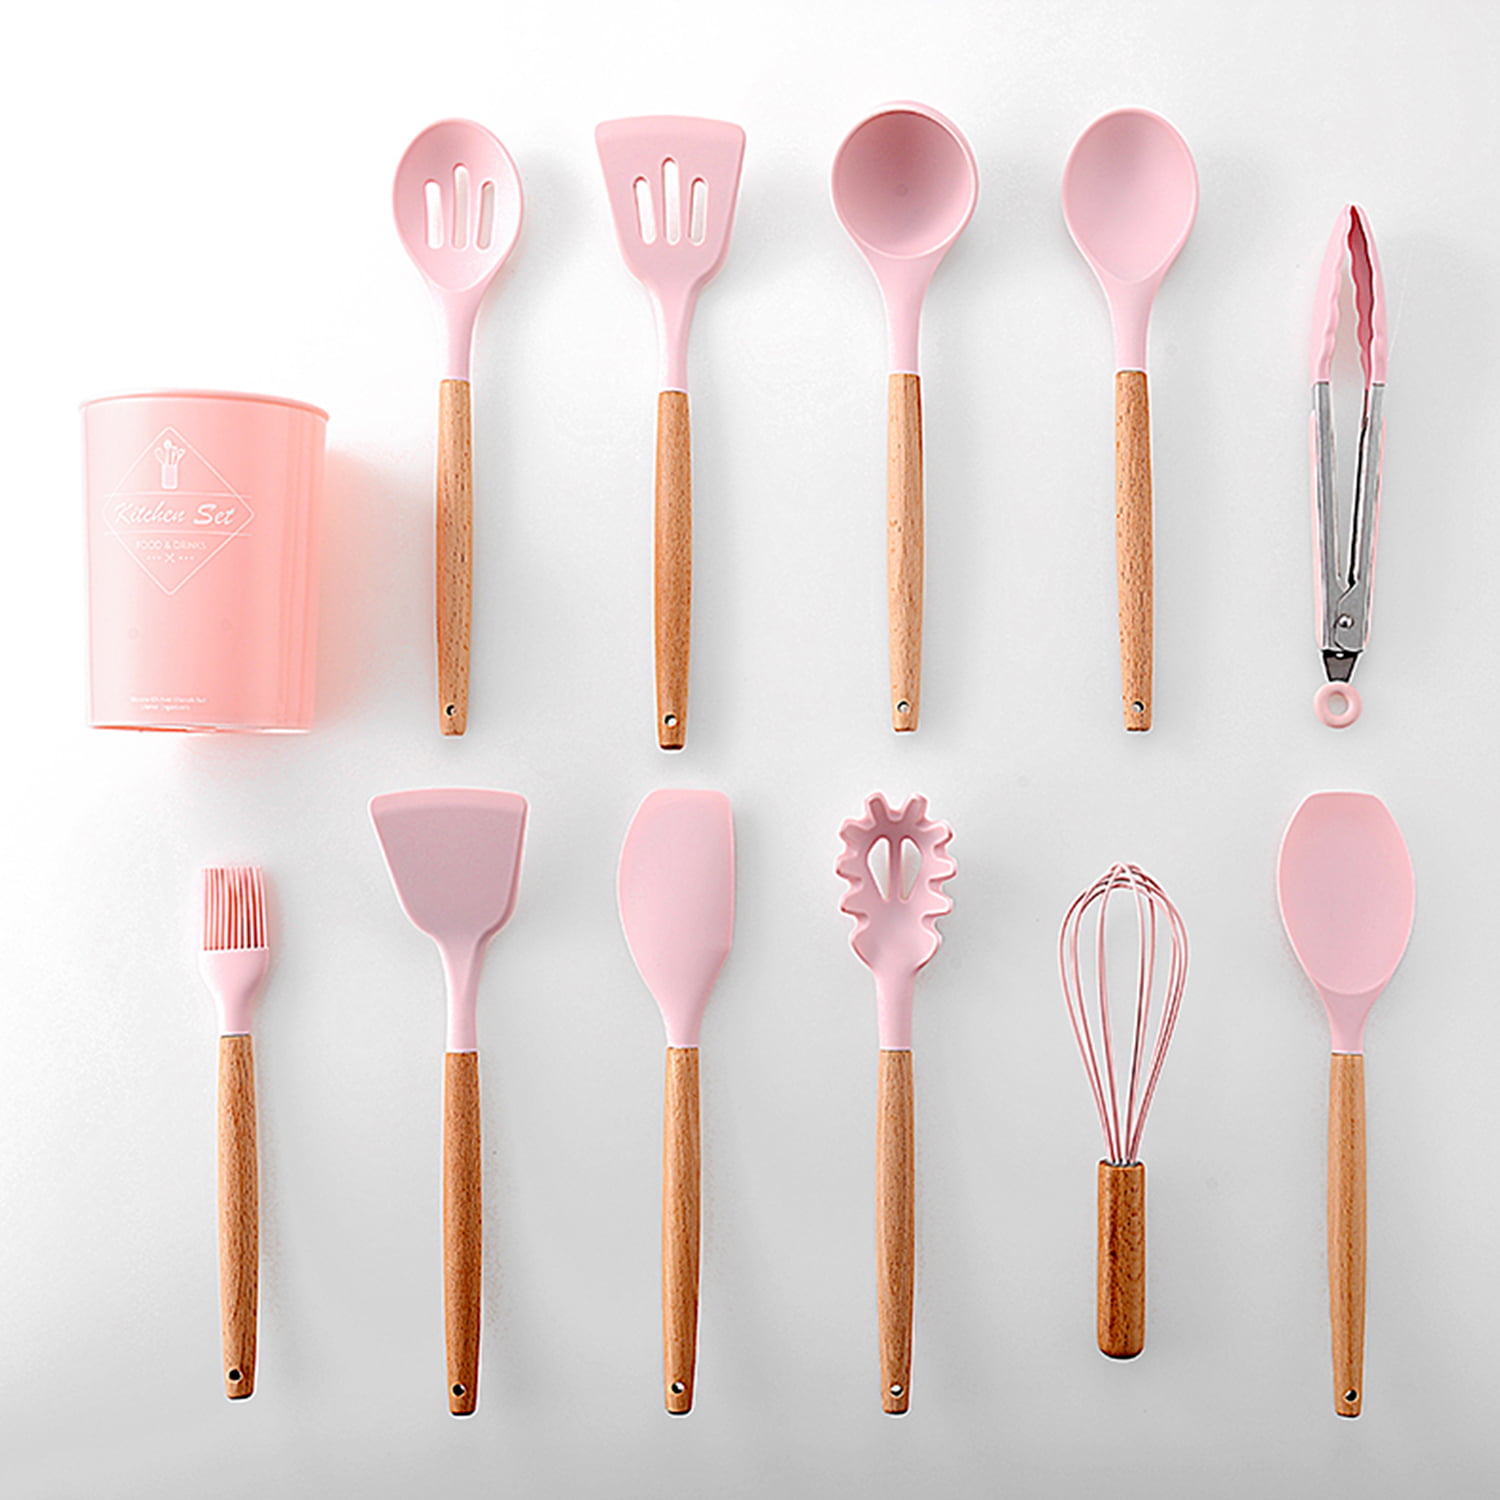 Details about   11 PCs Non-Stick Silicone Cooking Utensils Set with Storage Box Kitchen Tool 